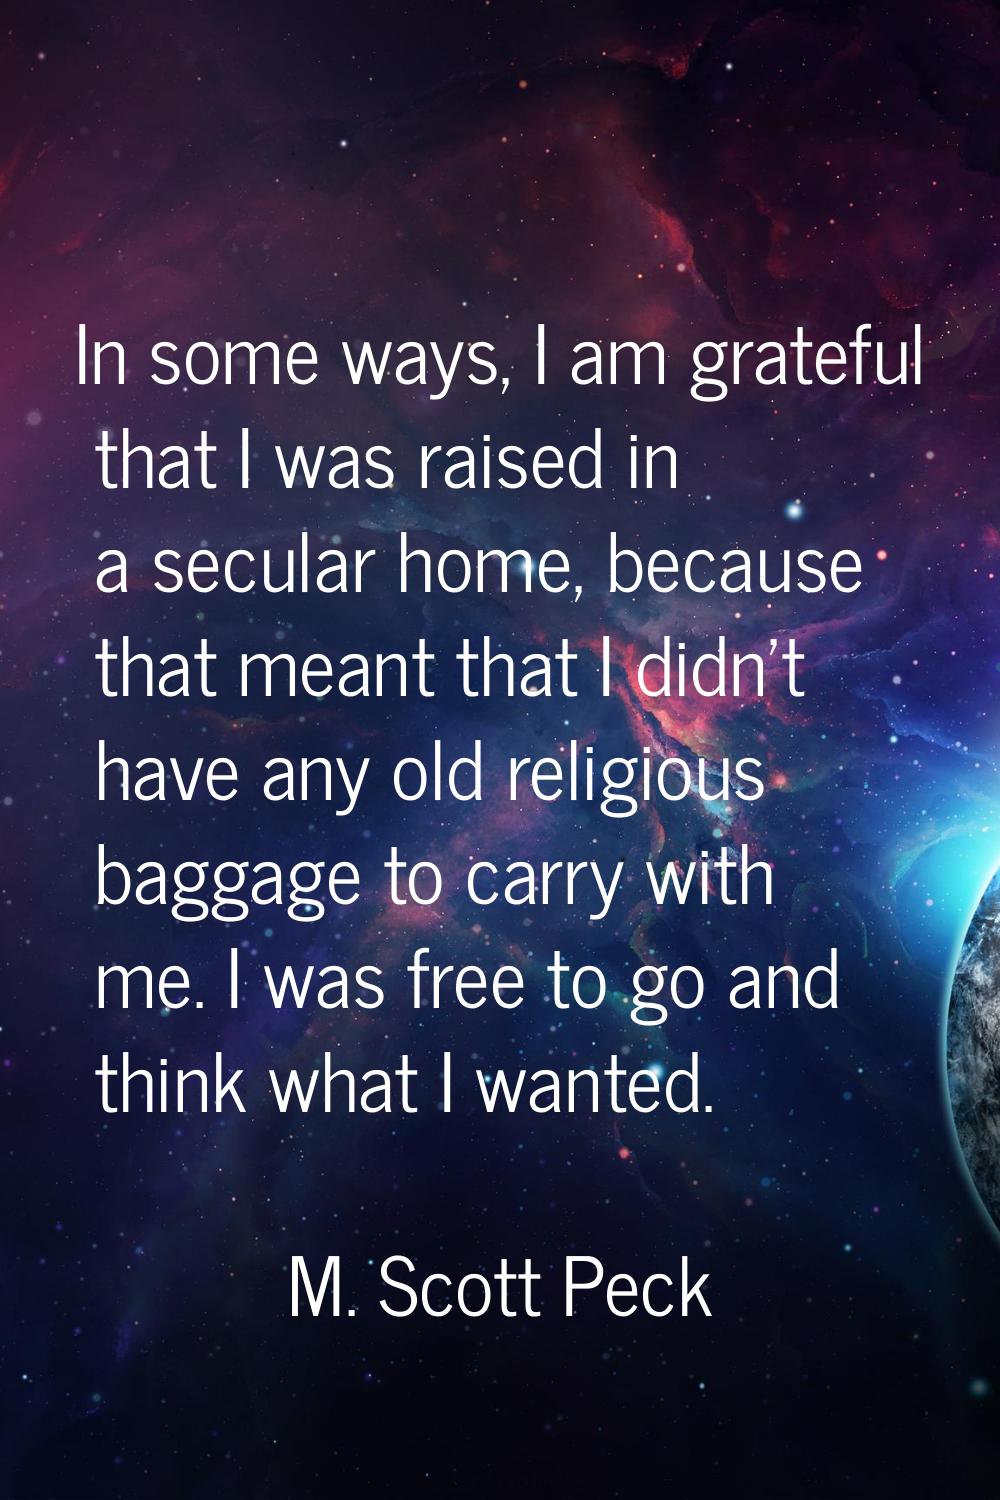 In some ways, I am grateful that I was raised in a secular home, because that meant that I didn't h